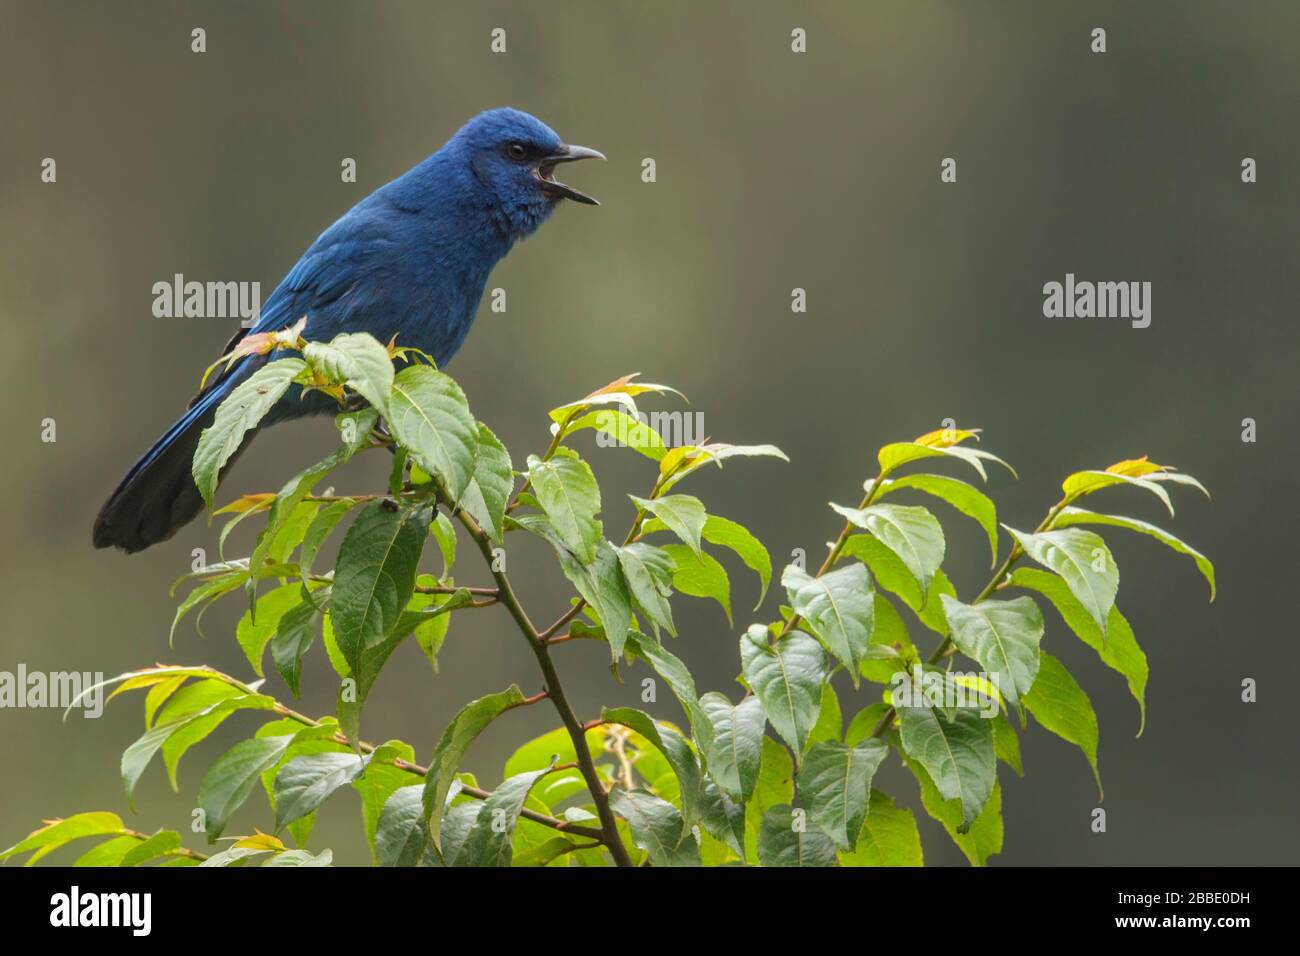 Unicolored Jay (Aphelocoma unicolor) perched on a branch in Guatemala in Central America. Stock Photo